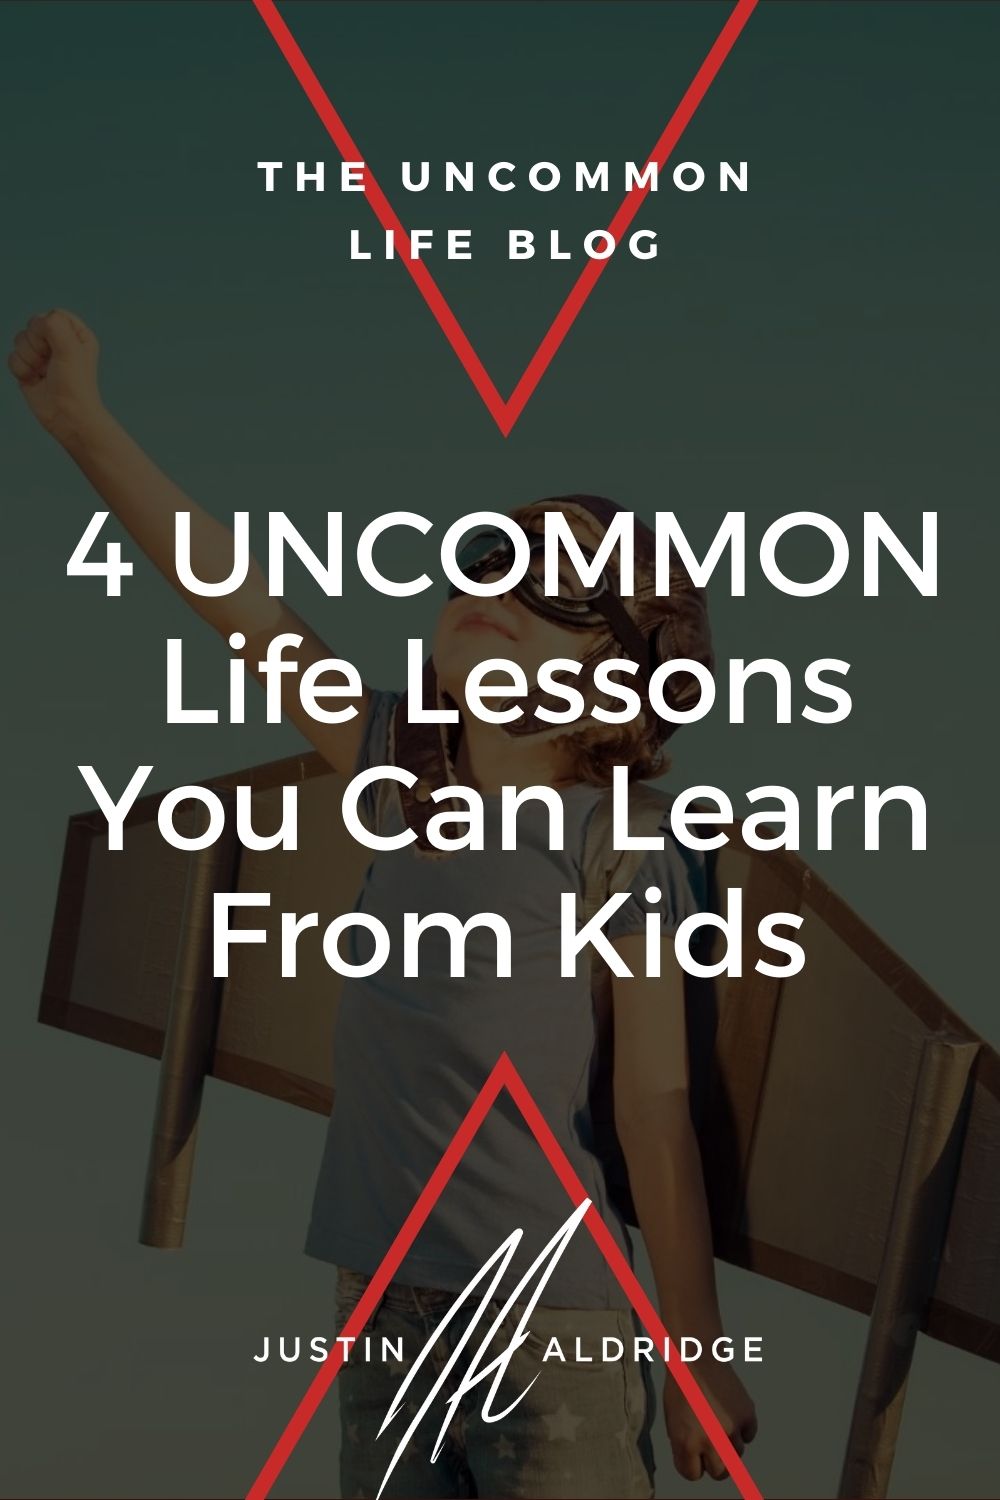 Child in an airplane costume in the background behind the text, "4 UNCOMMON Life Lessons You Can Learn From Kids"